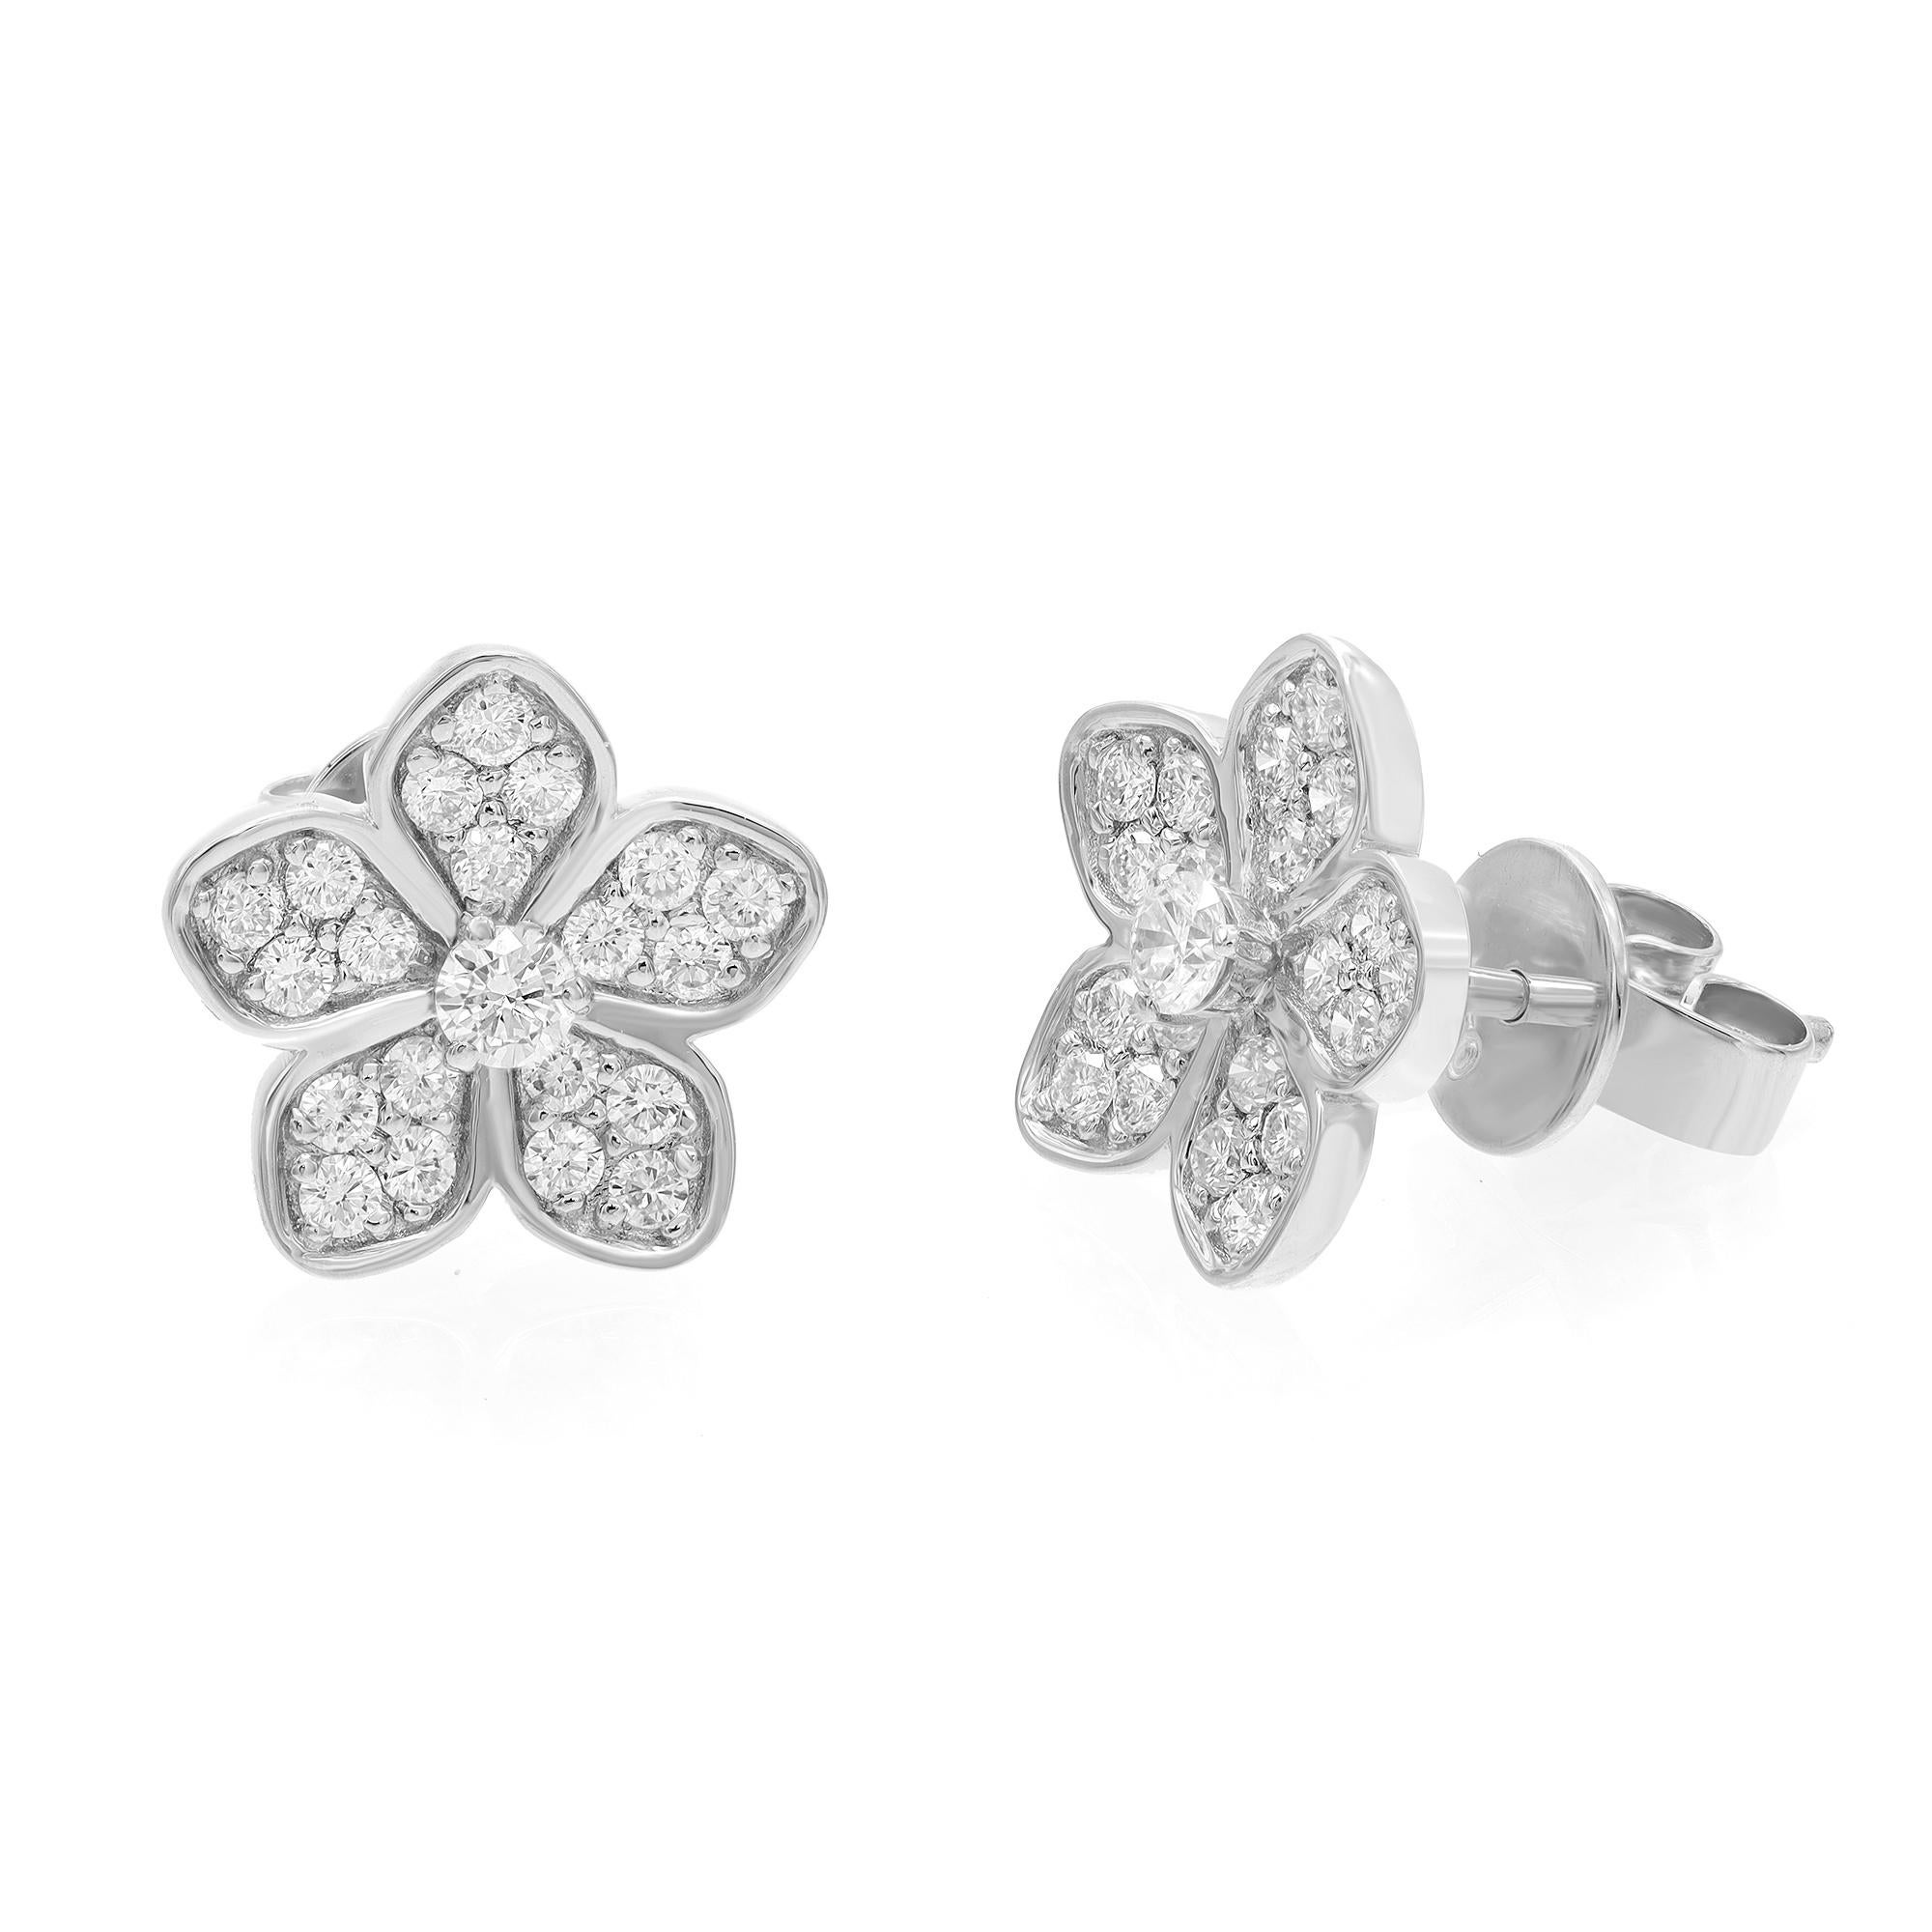 Pave Set Round Cut Diamond Flower Stud Earrings 18K White Gold 0.52Cttw For Sale